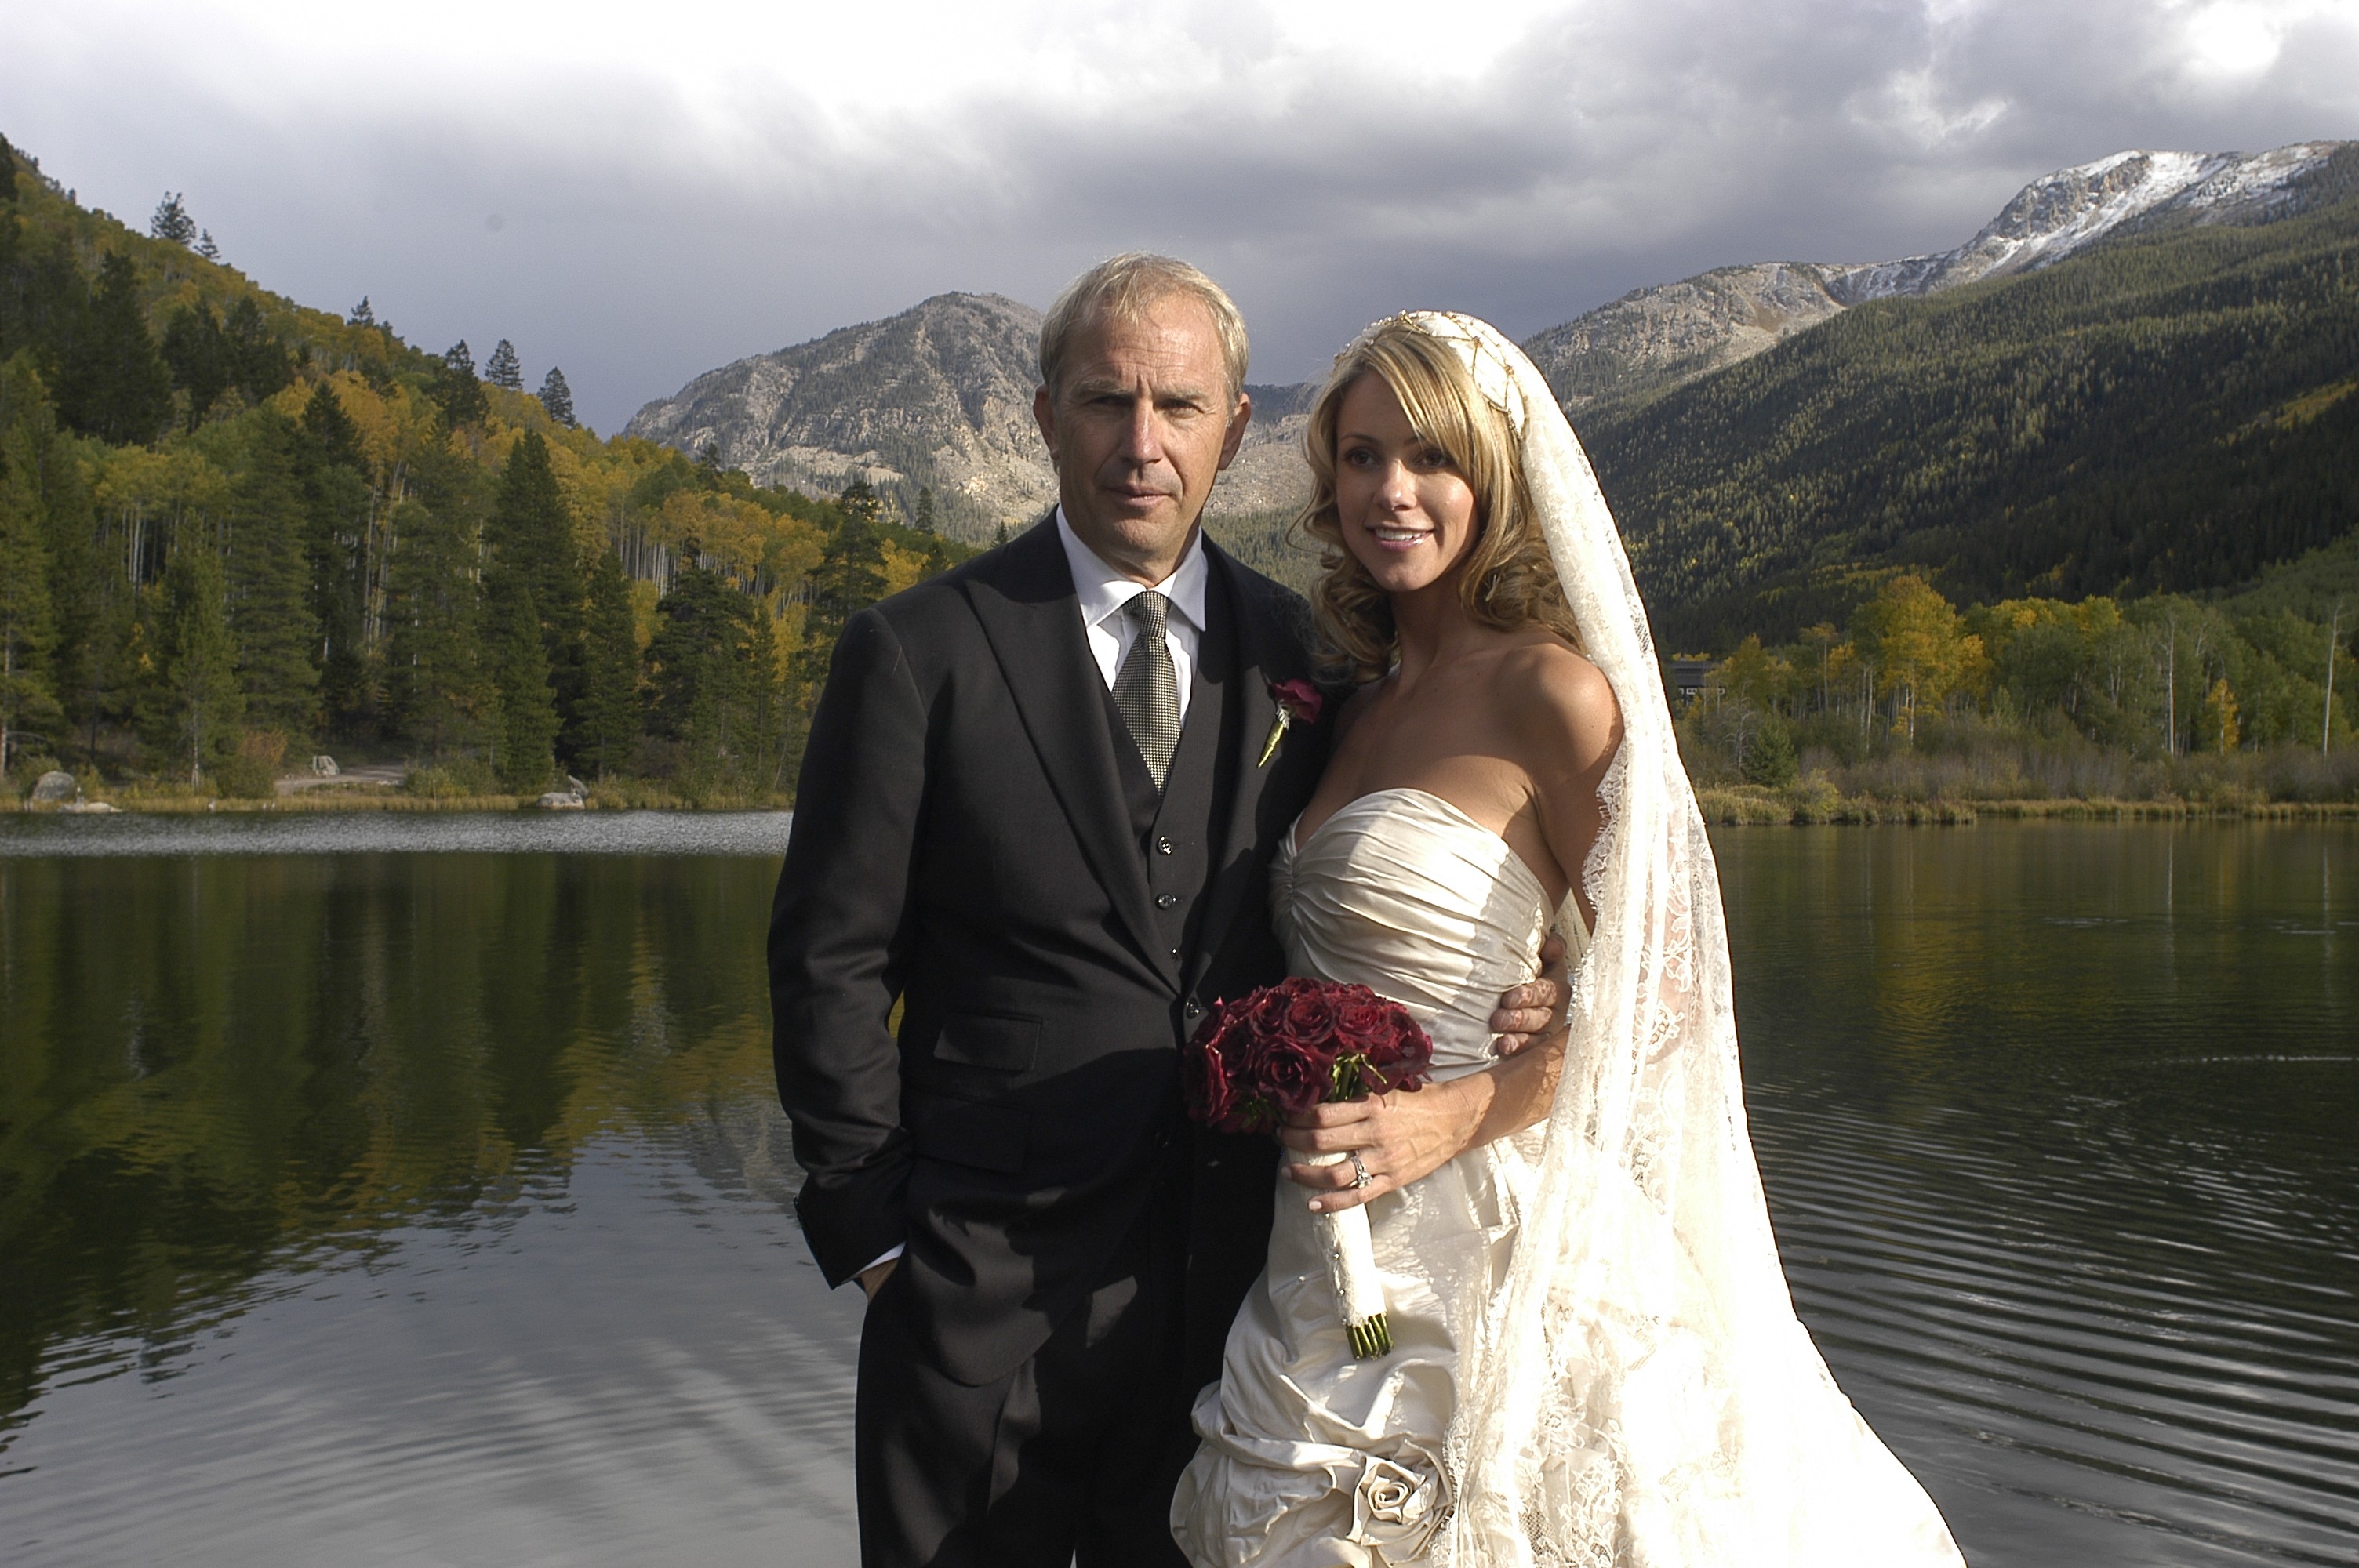 Kevin Costner and Christine Baumgartner on the day of their wedding in Aspen, 2004 | Source: Getty Images